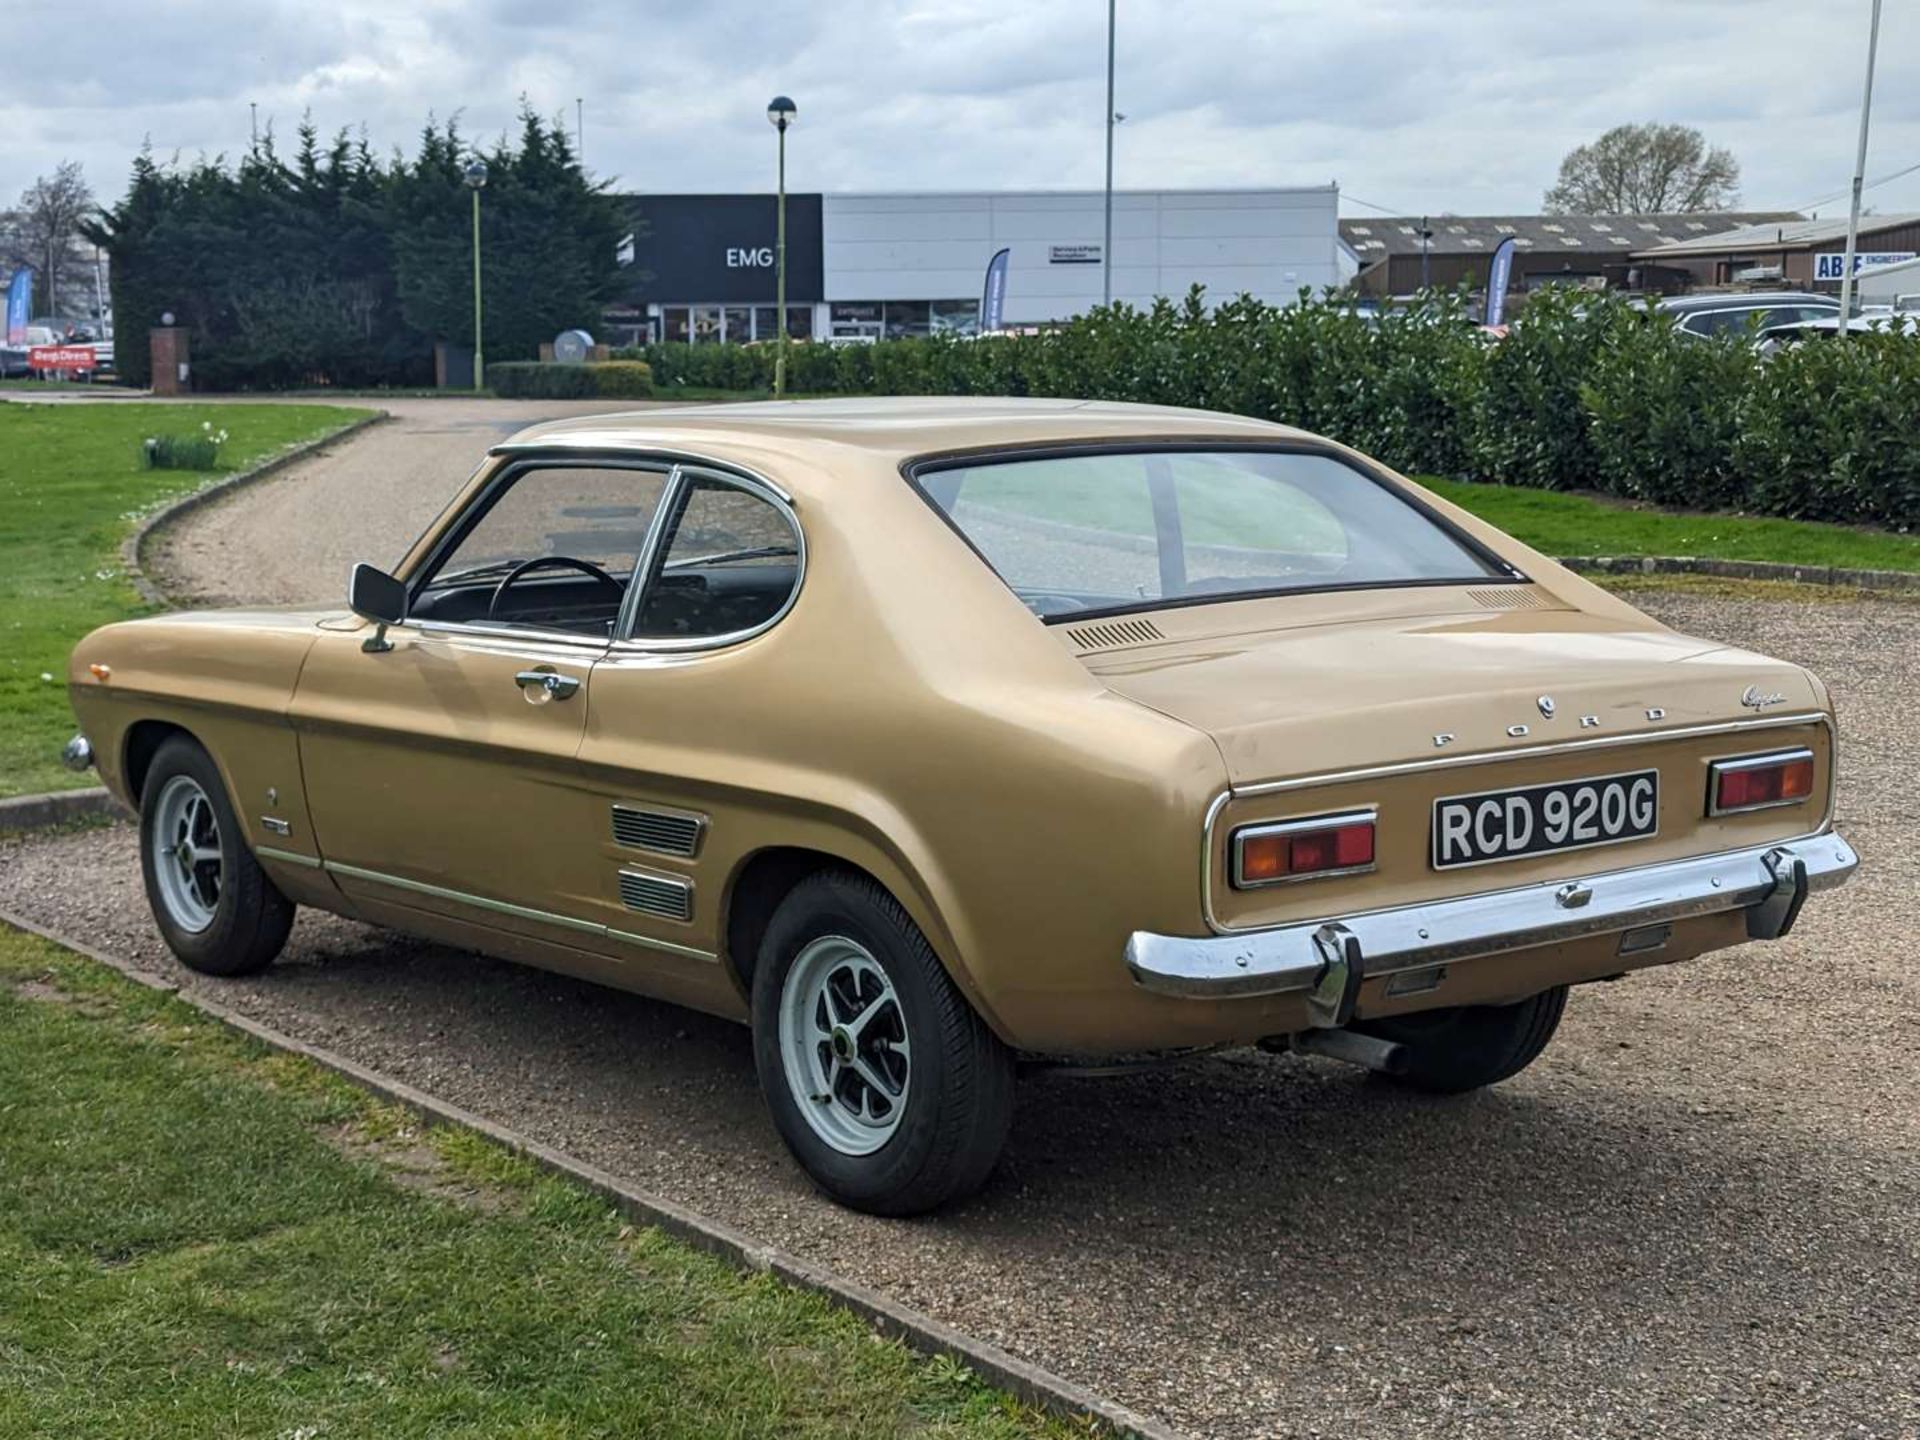 1969 FORD CAPRI 1600 GT LHD - Image 5 of 26